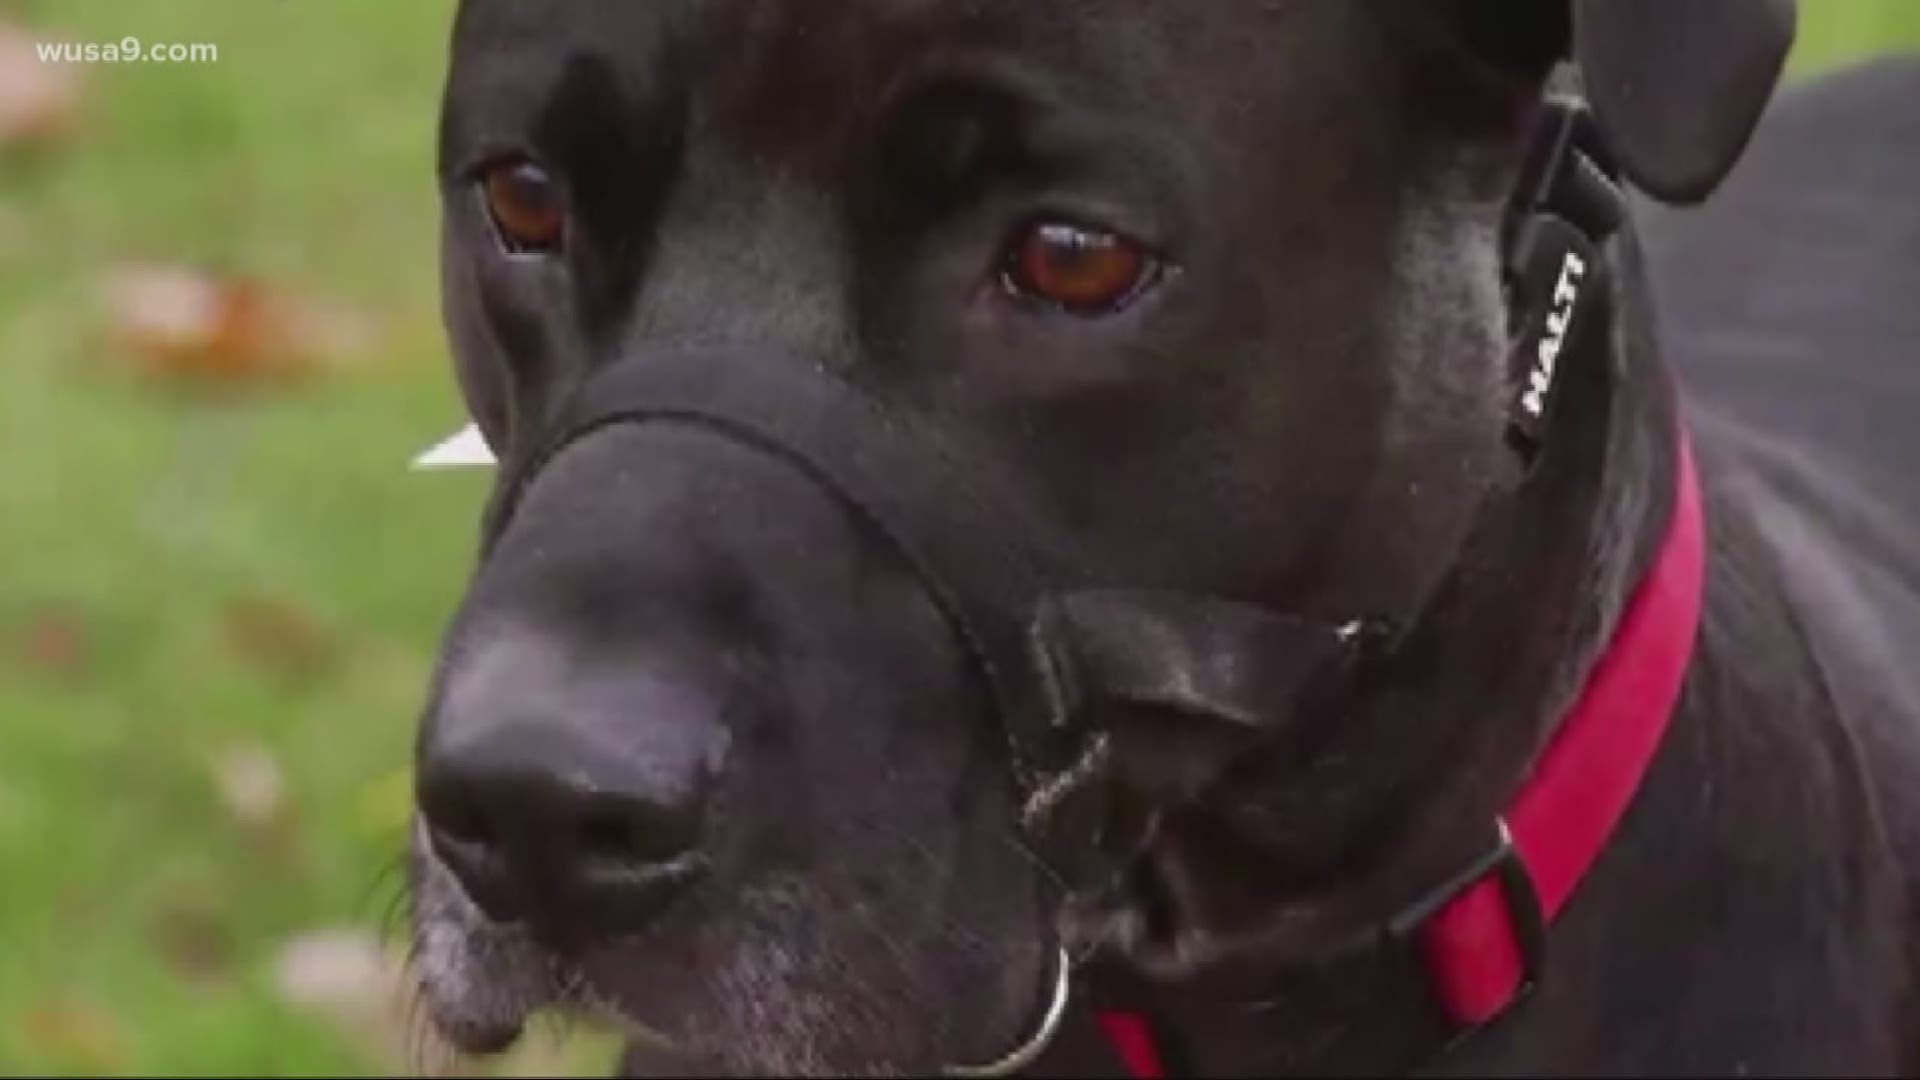 Prince George's Pit Bull Ban dropped from proposed animal control legislation